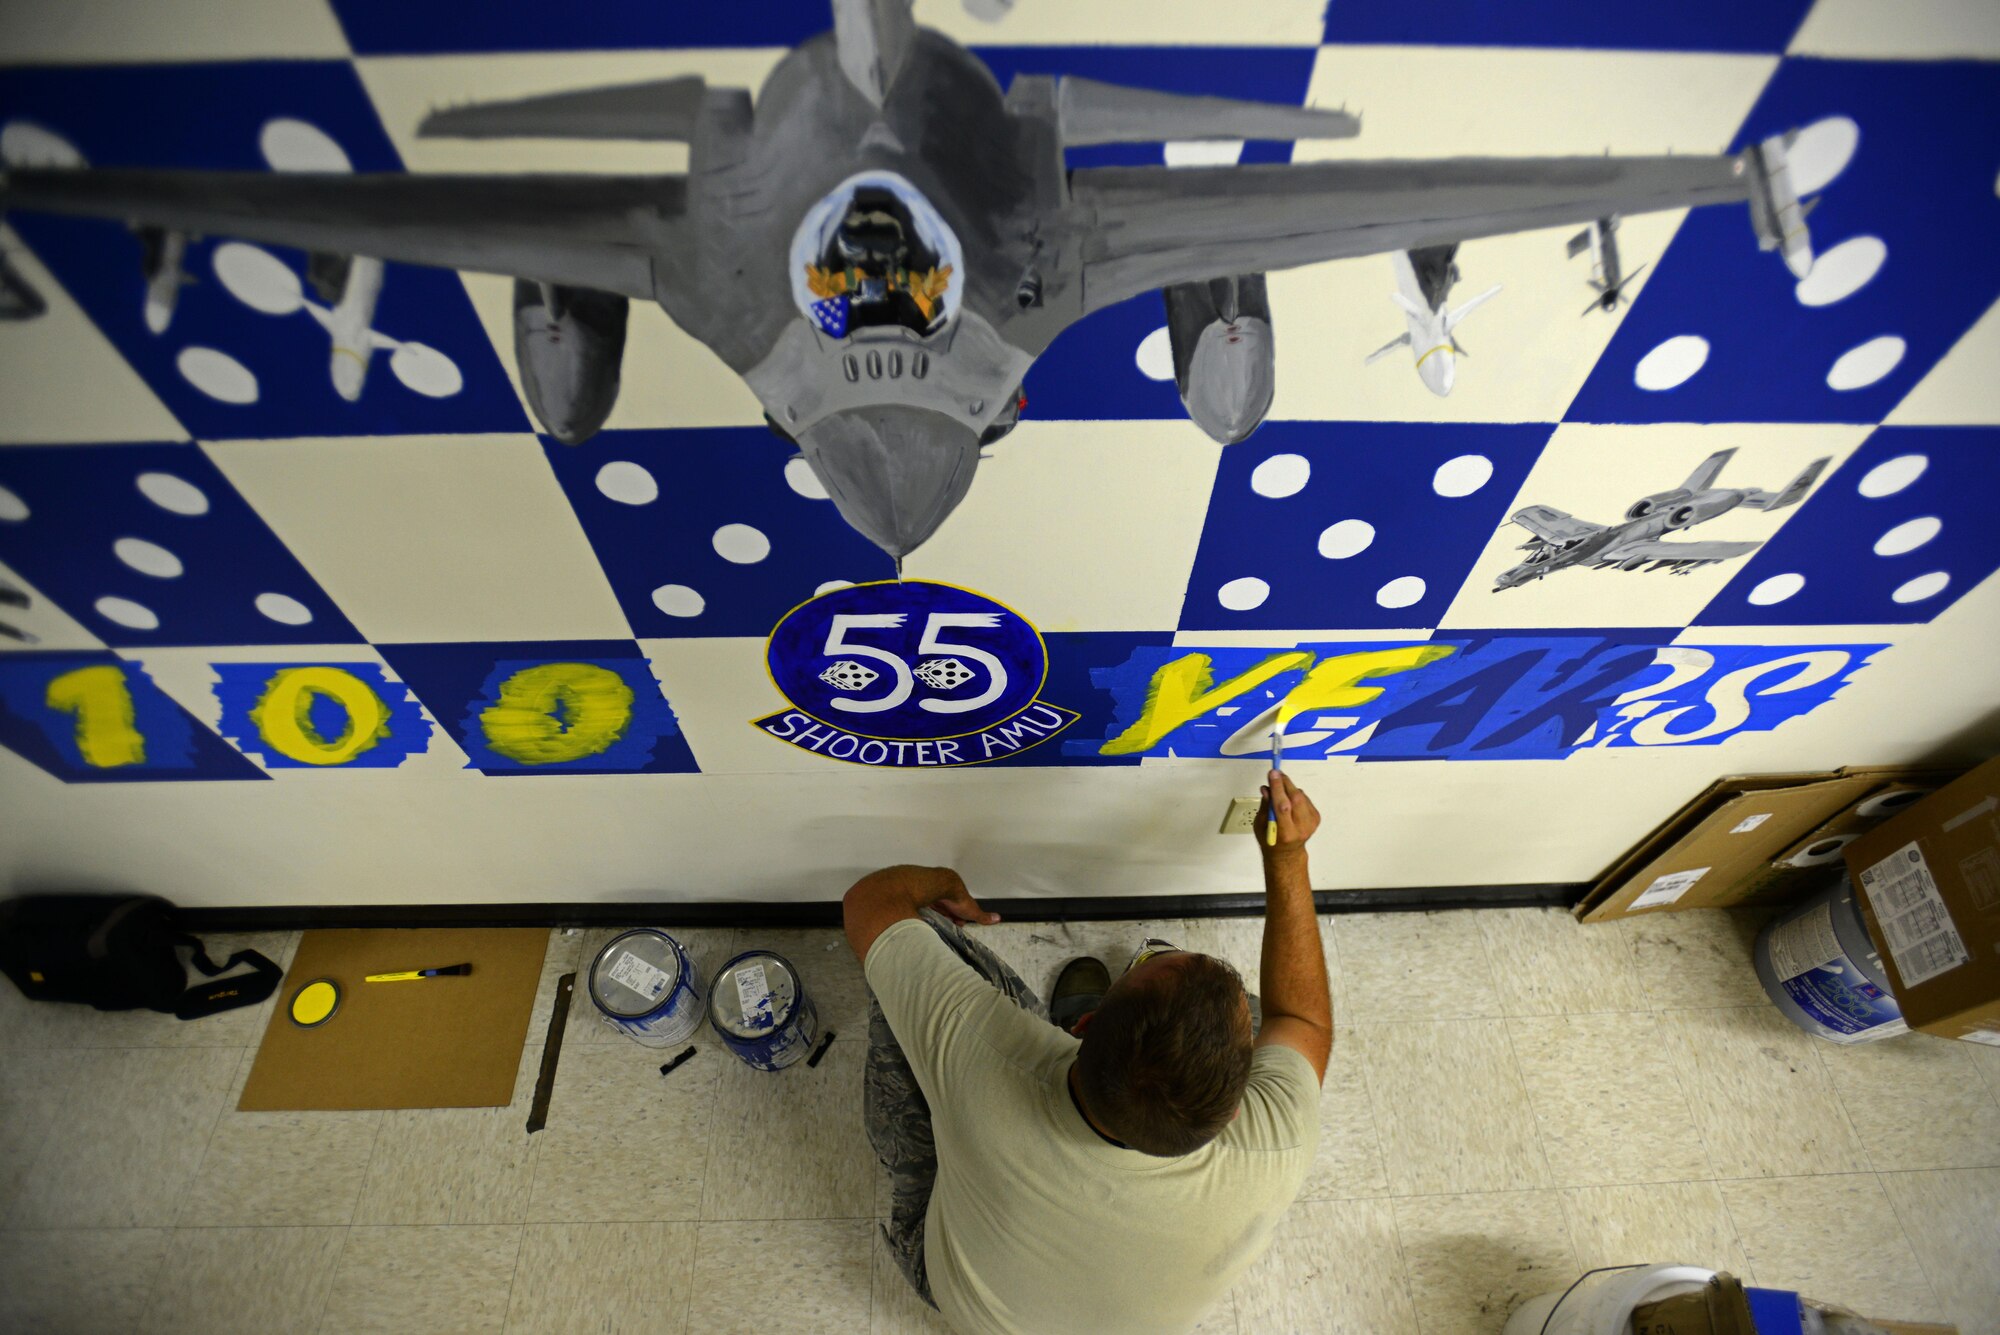 U.S. Air Force Tech. Sgt. Brian Barnes, 20 Aircraft Maintenance Squadron, 55th Aircraft Maintenance Unit (AMU) tactical aircraft maintainer, applies the first coat of paint to the ‘100 Years’ portion of a mural at the 55th AMU building at Shaw Air Force Base, S.C., April 24, 2017. The mural was designed to showcase the history and achievements of the 55th Fighter Squadron across 100 years. (U.S. Air Force photo by Senior Airman Kelsey Tucker)